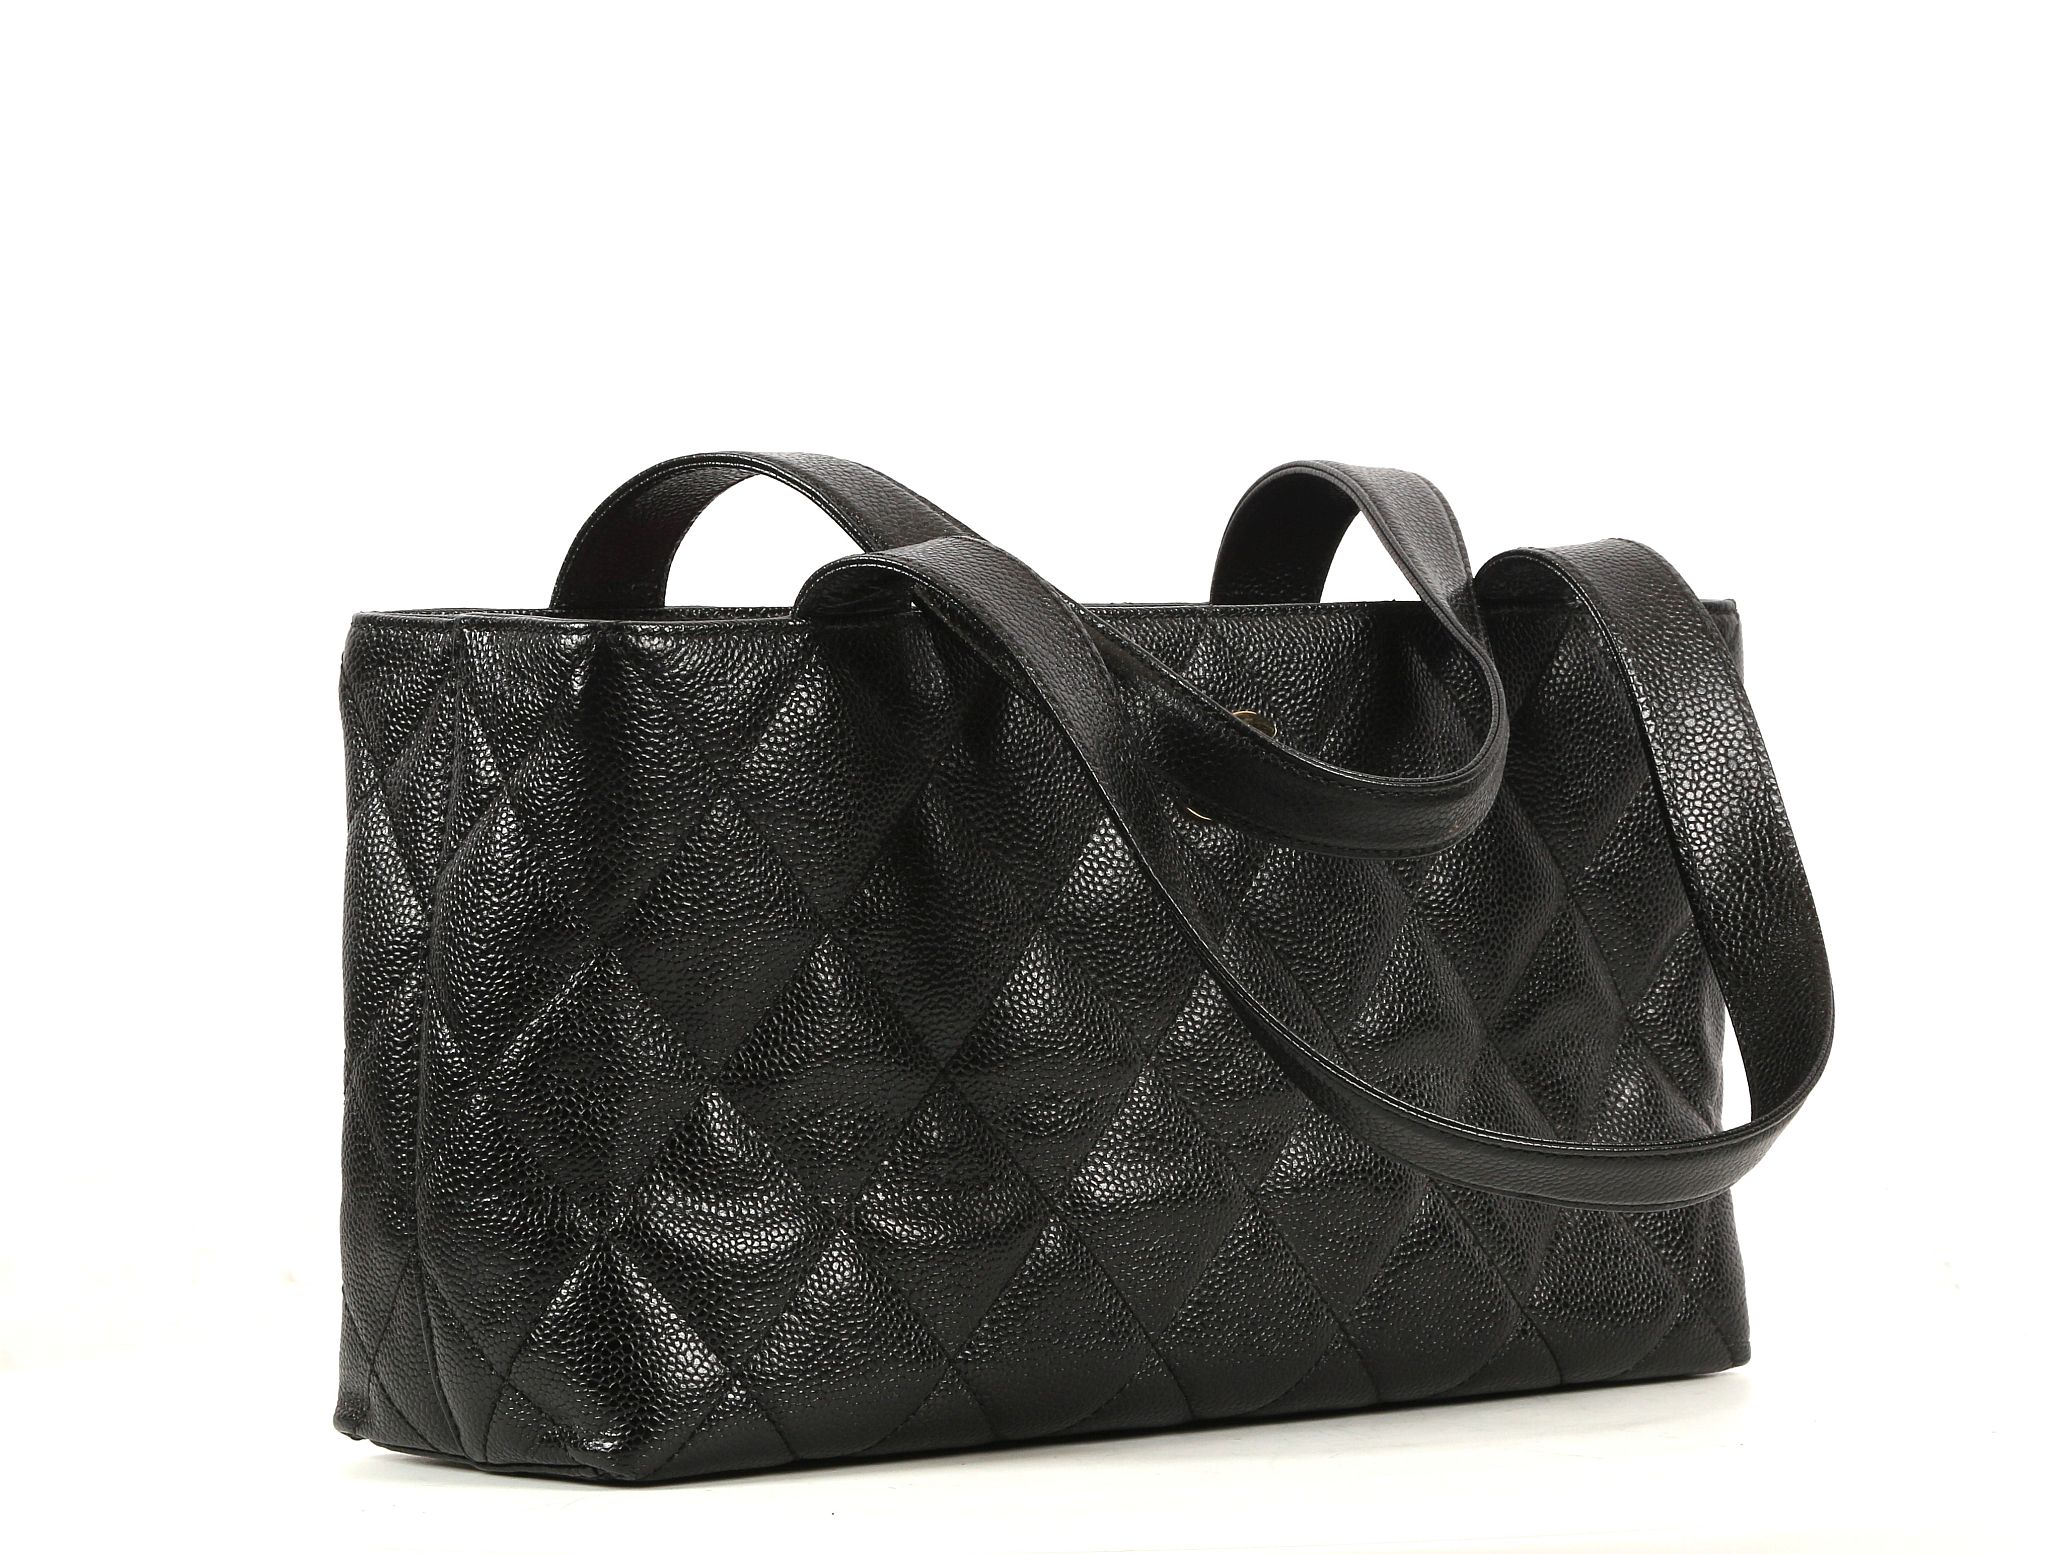 CHANEL VINTAGE EAST/WEST TOTE, early 1980s, quilted black caviar leather with gilt hard ware, 33cm - Image 3 of 8